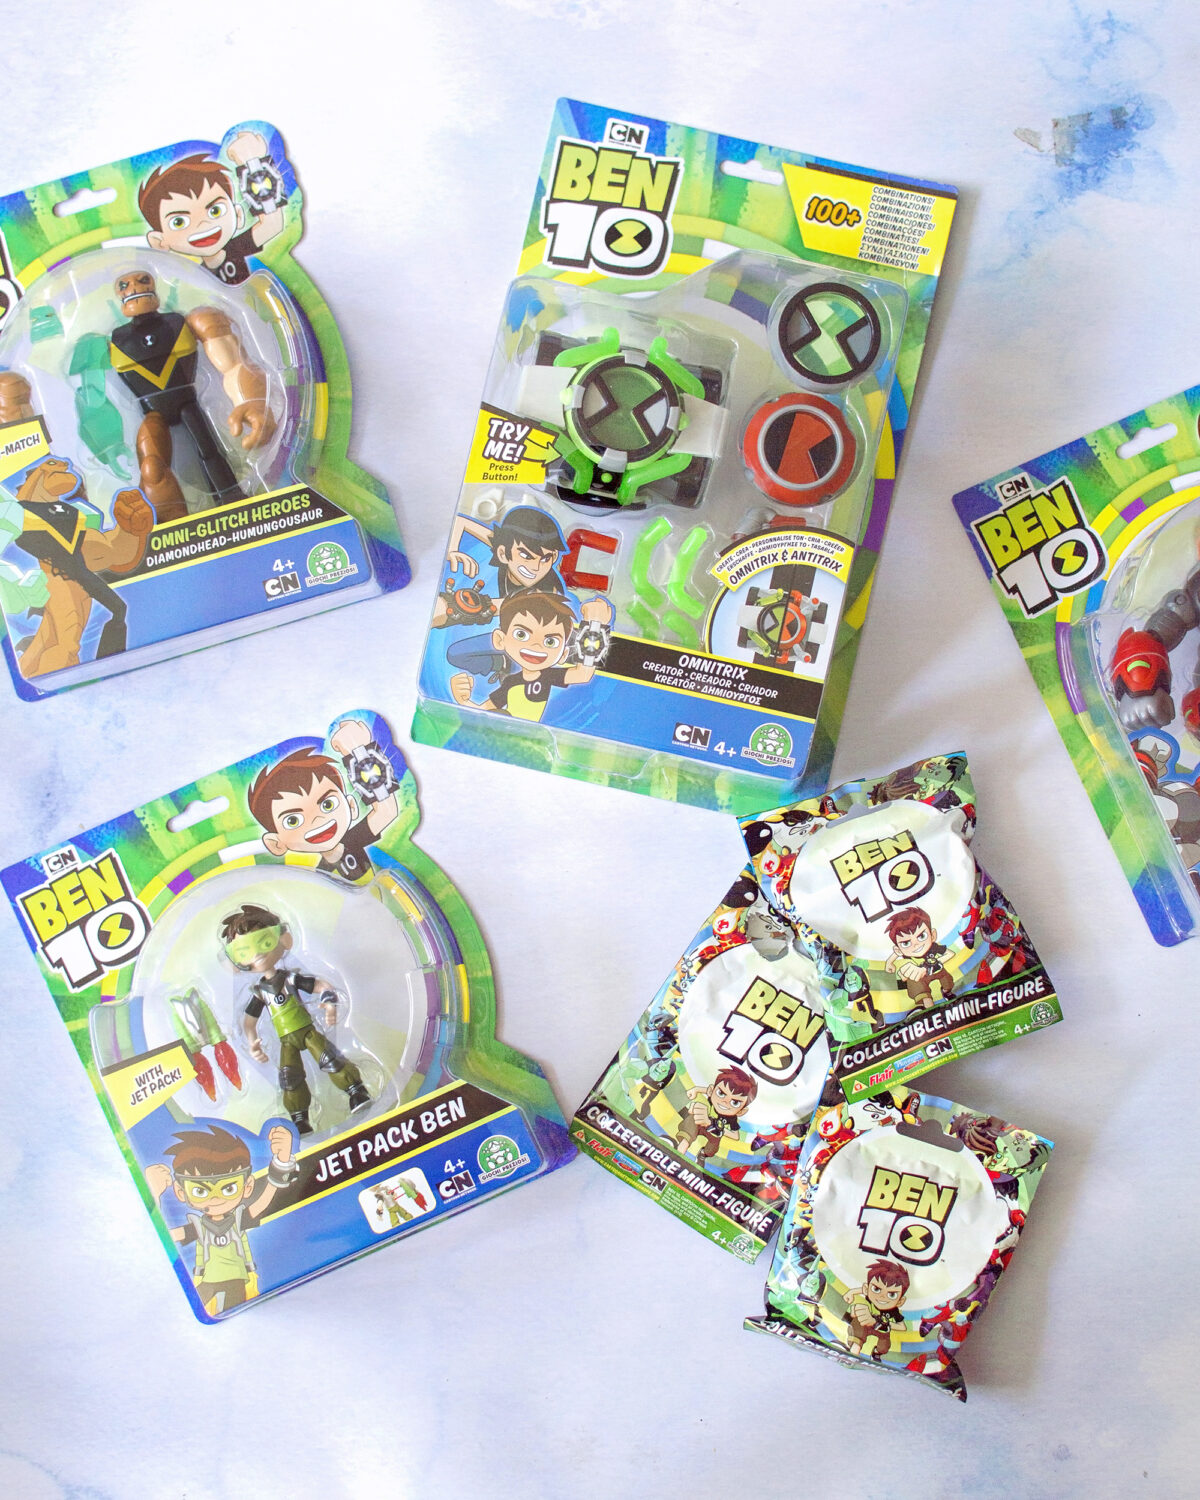 Ben 10 Power Trip by Outright Games, How to Host a Gaming Party, The Jones Boys Toys, Ben 10 Omnitrix Creator Kit, Ben 10 Blind Bags, Ben 10 Figures
